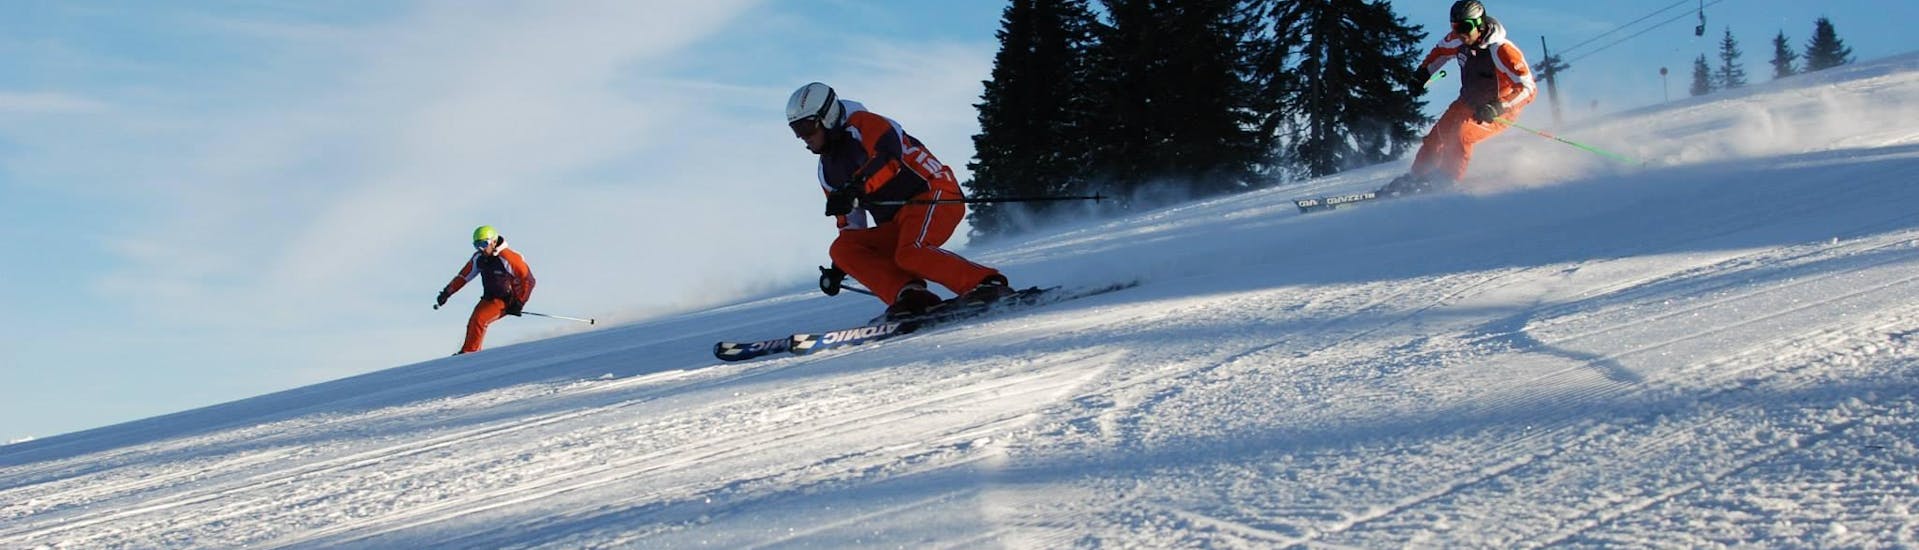 Adult Ski Lessons + Ski Hire Package for All Levels from Skischule Toni Gruber.